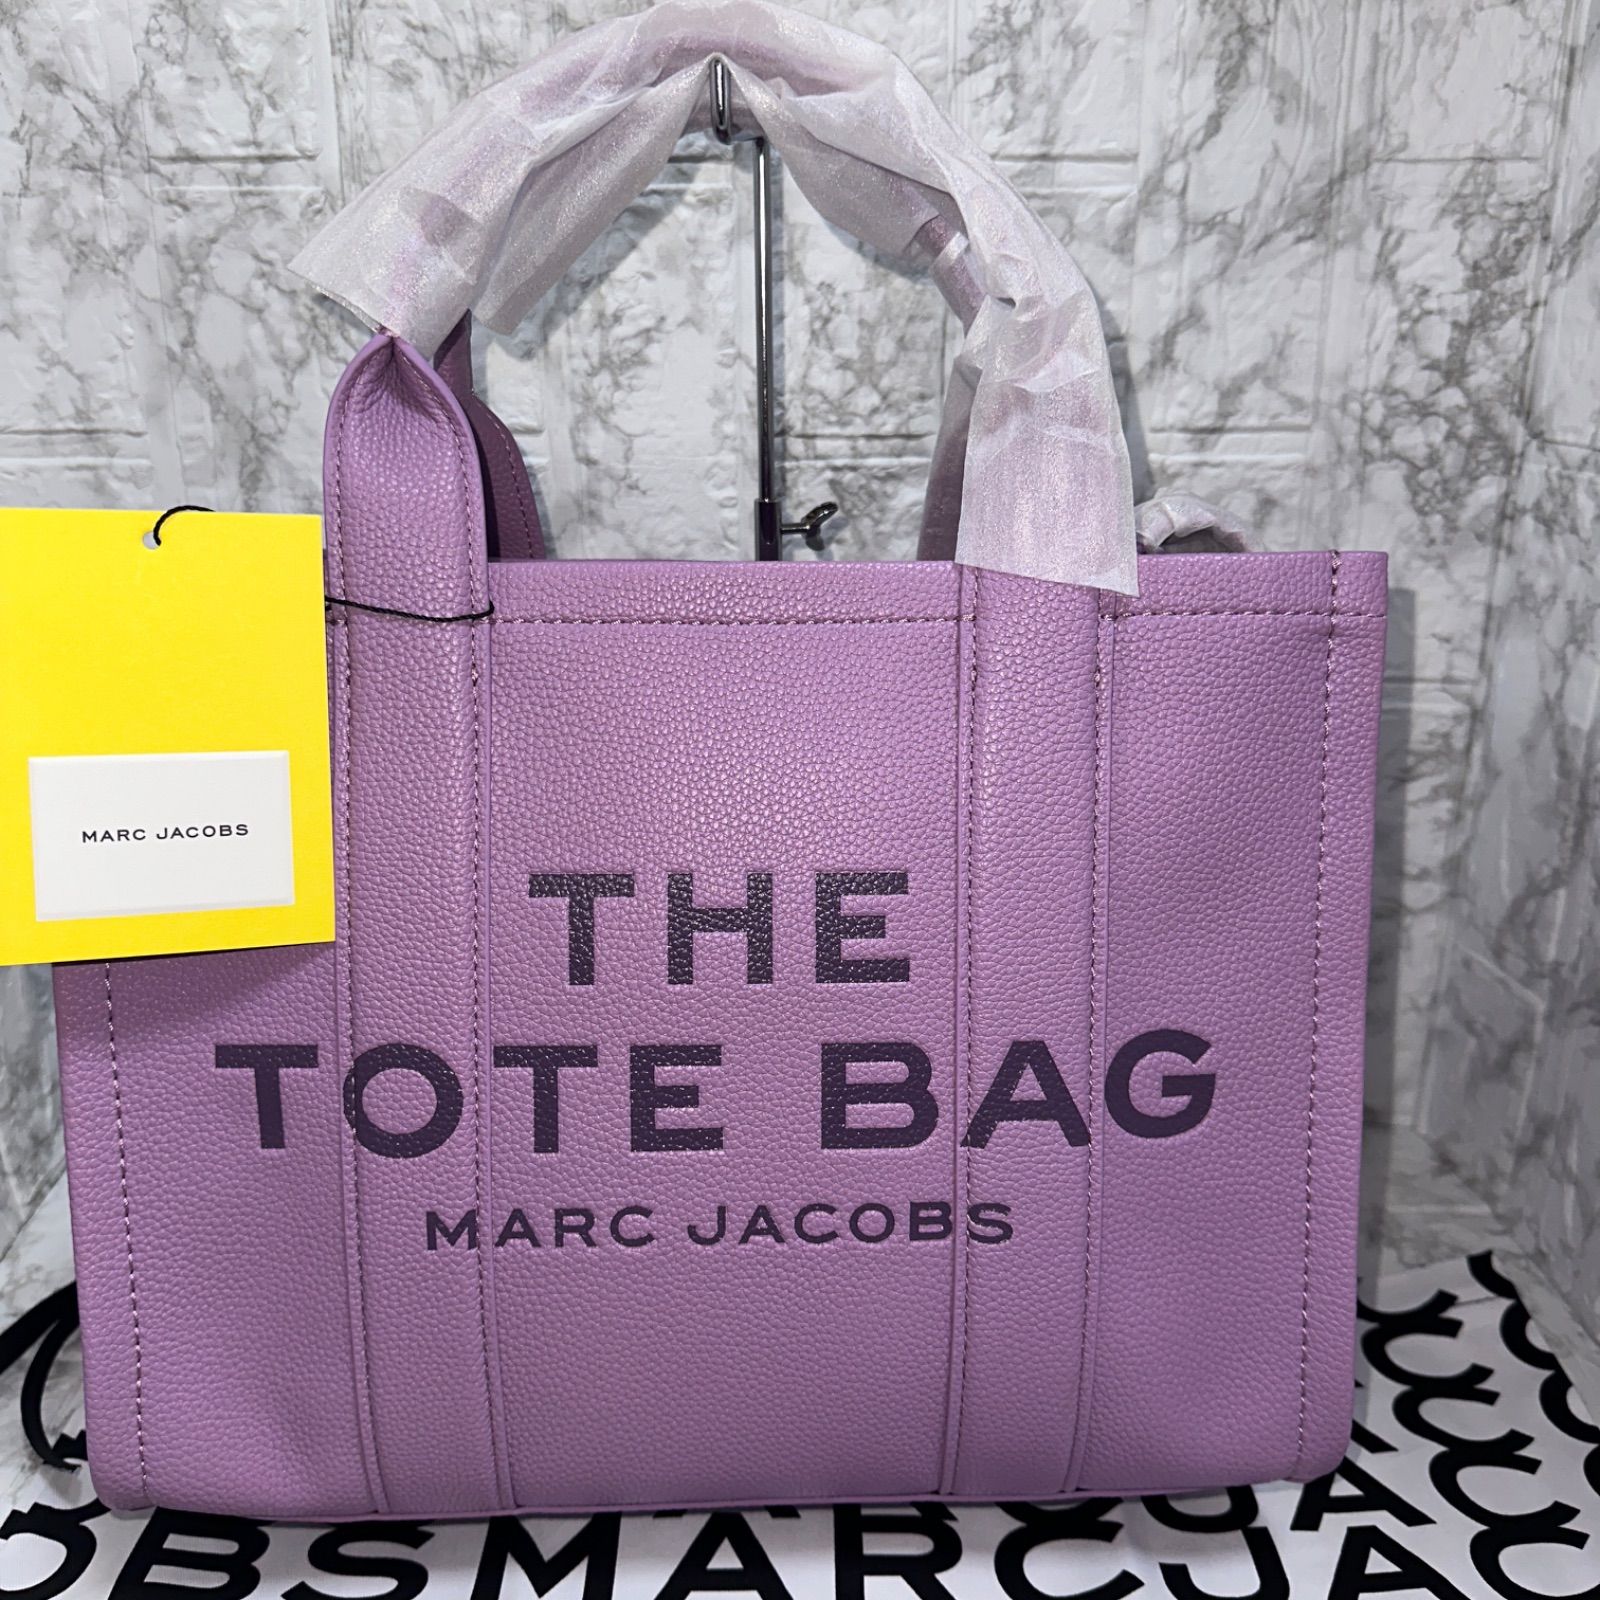 MARCJACOBSバッグ新品★MARC JACOBS マークジェイコブストートバック2way A4対応